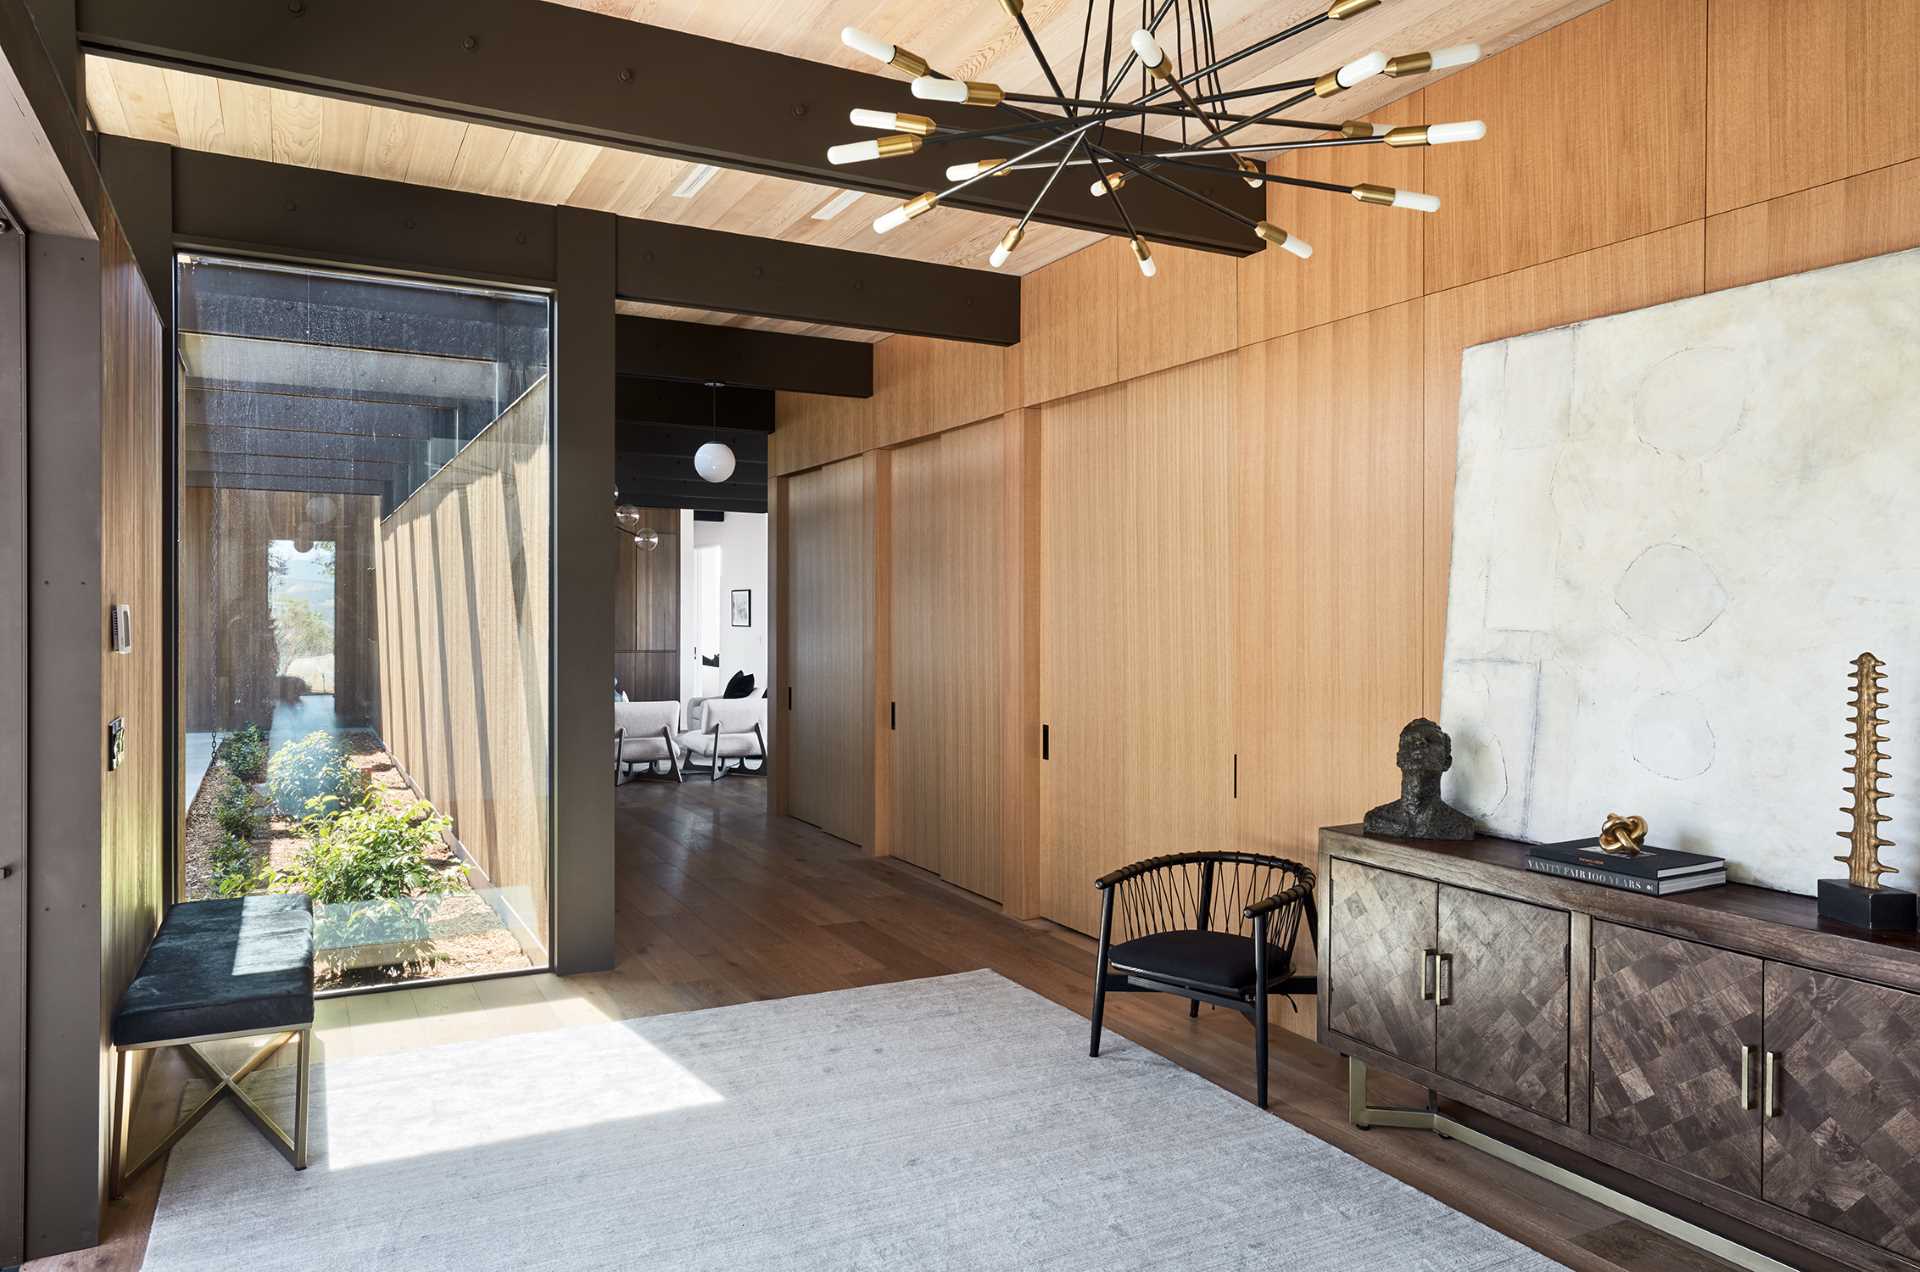 This modern entryway has a small bench area, as well as a sculptural chandelier and wood accent wall that allows collection of doors to blend in.